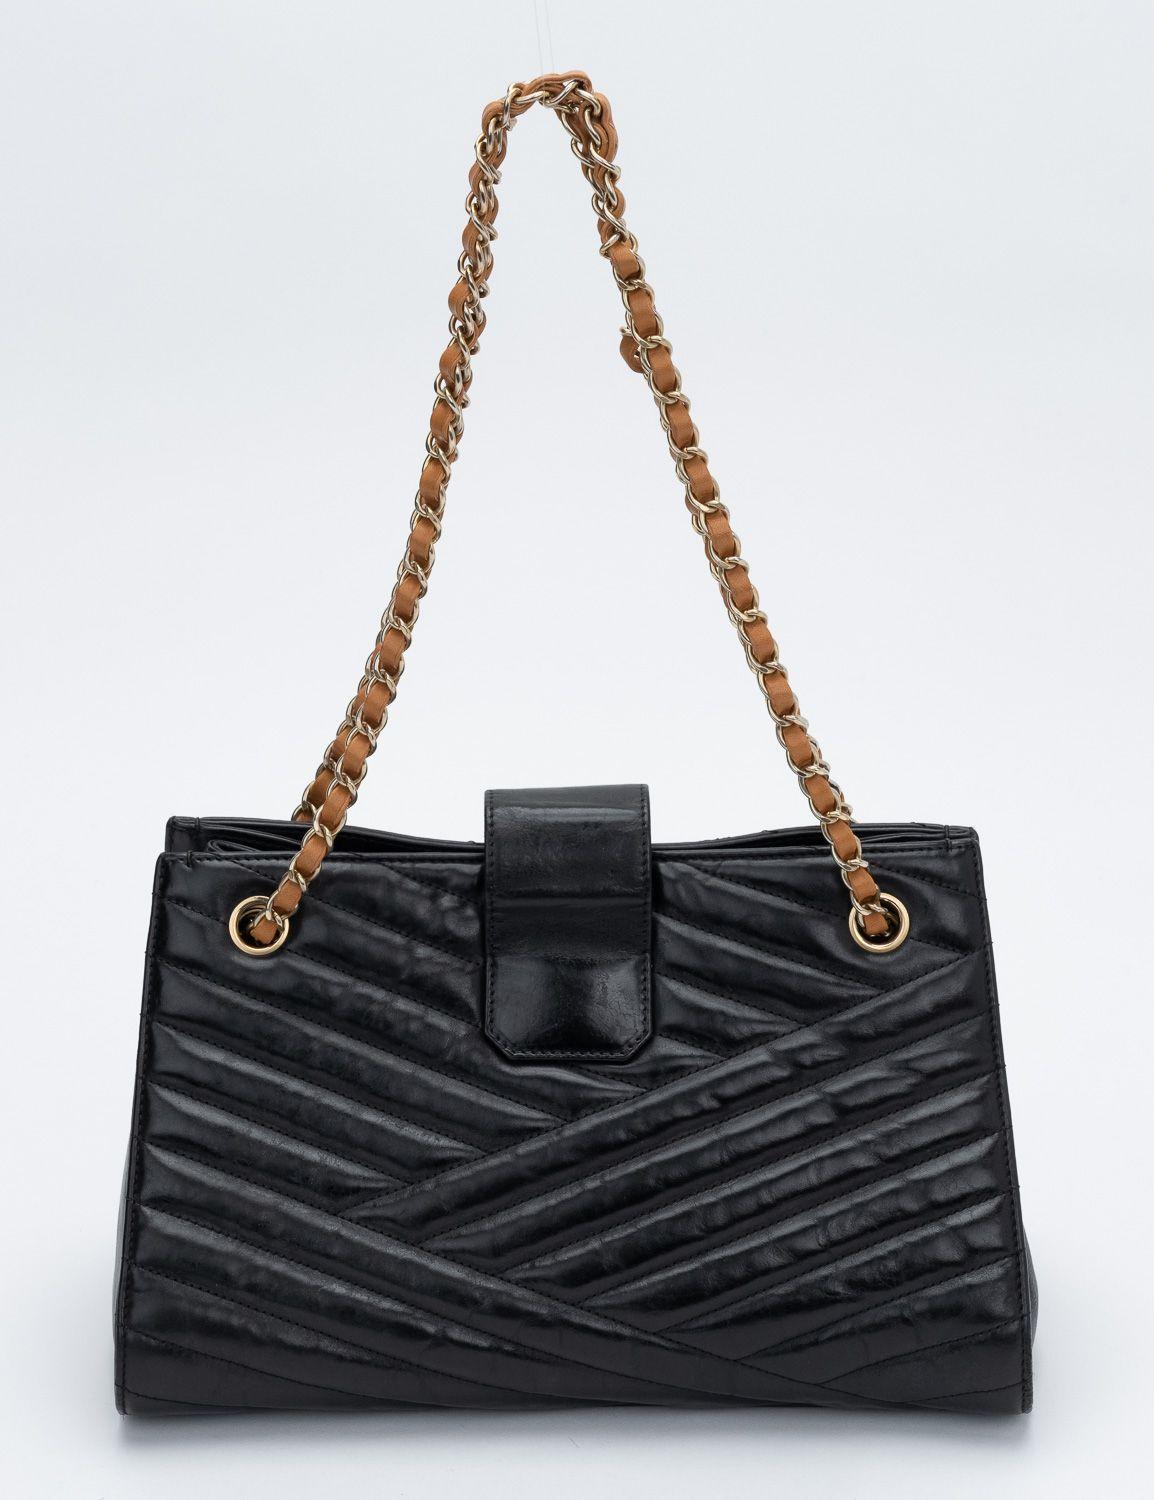 Chanel Black Gabrielle Shoulder Bag In Excellent Condition For Sale In West Hollywood, CA